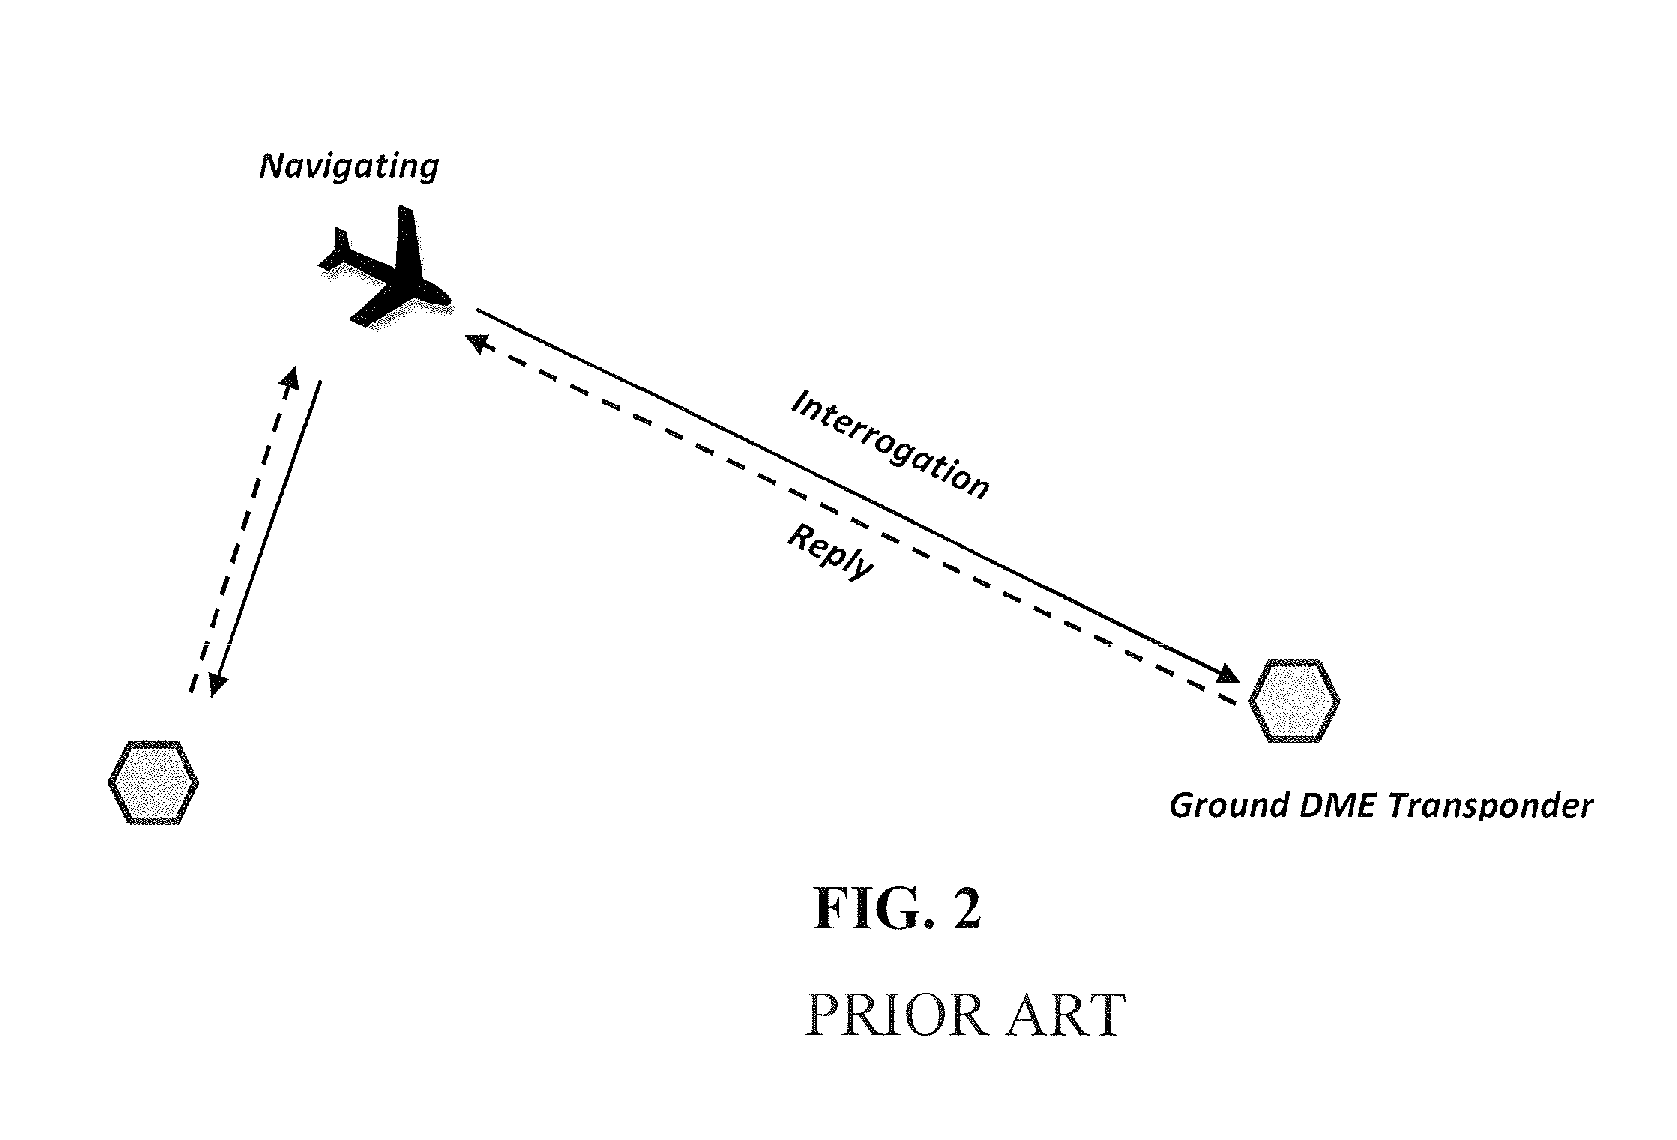 System and method for aircraft navigation based on diverse ranging algorithm using ads-b messages and ground transceiver responses